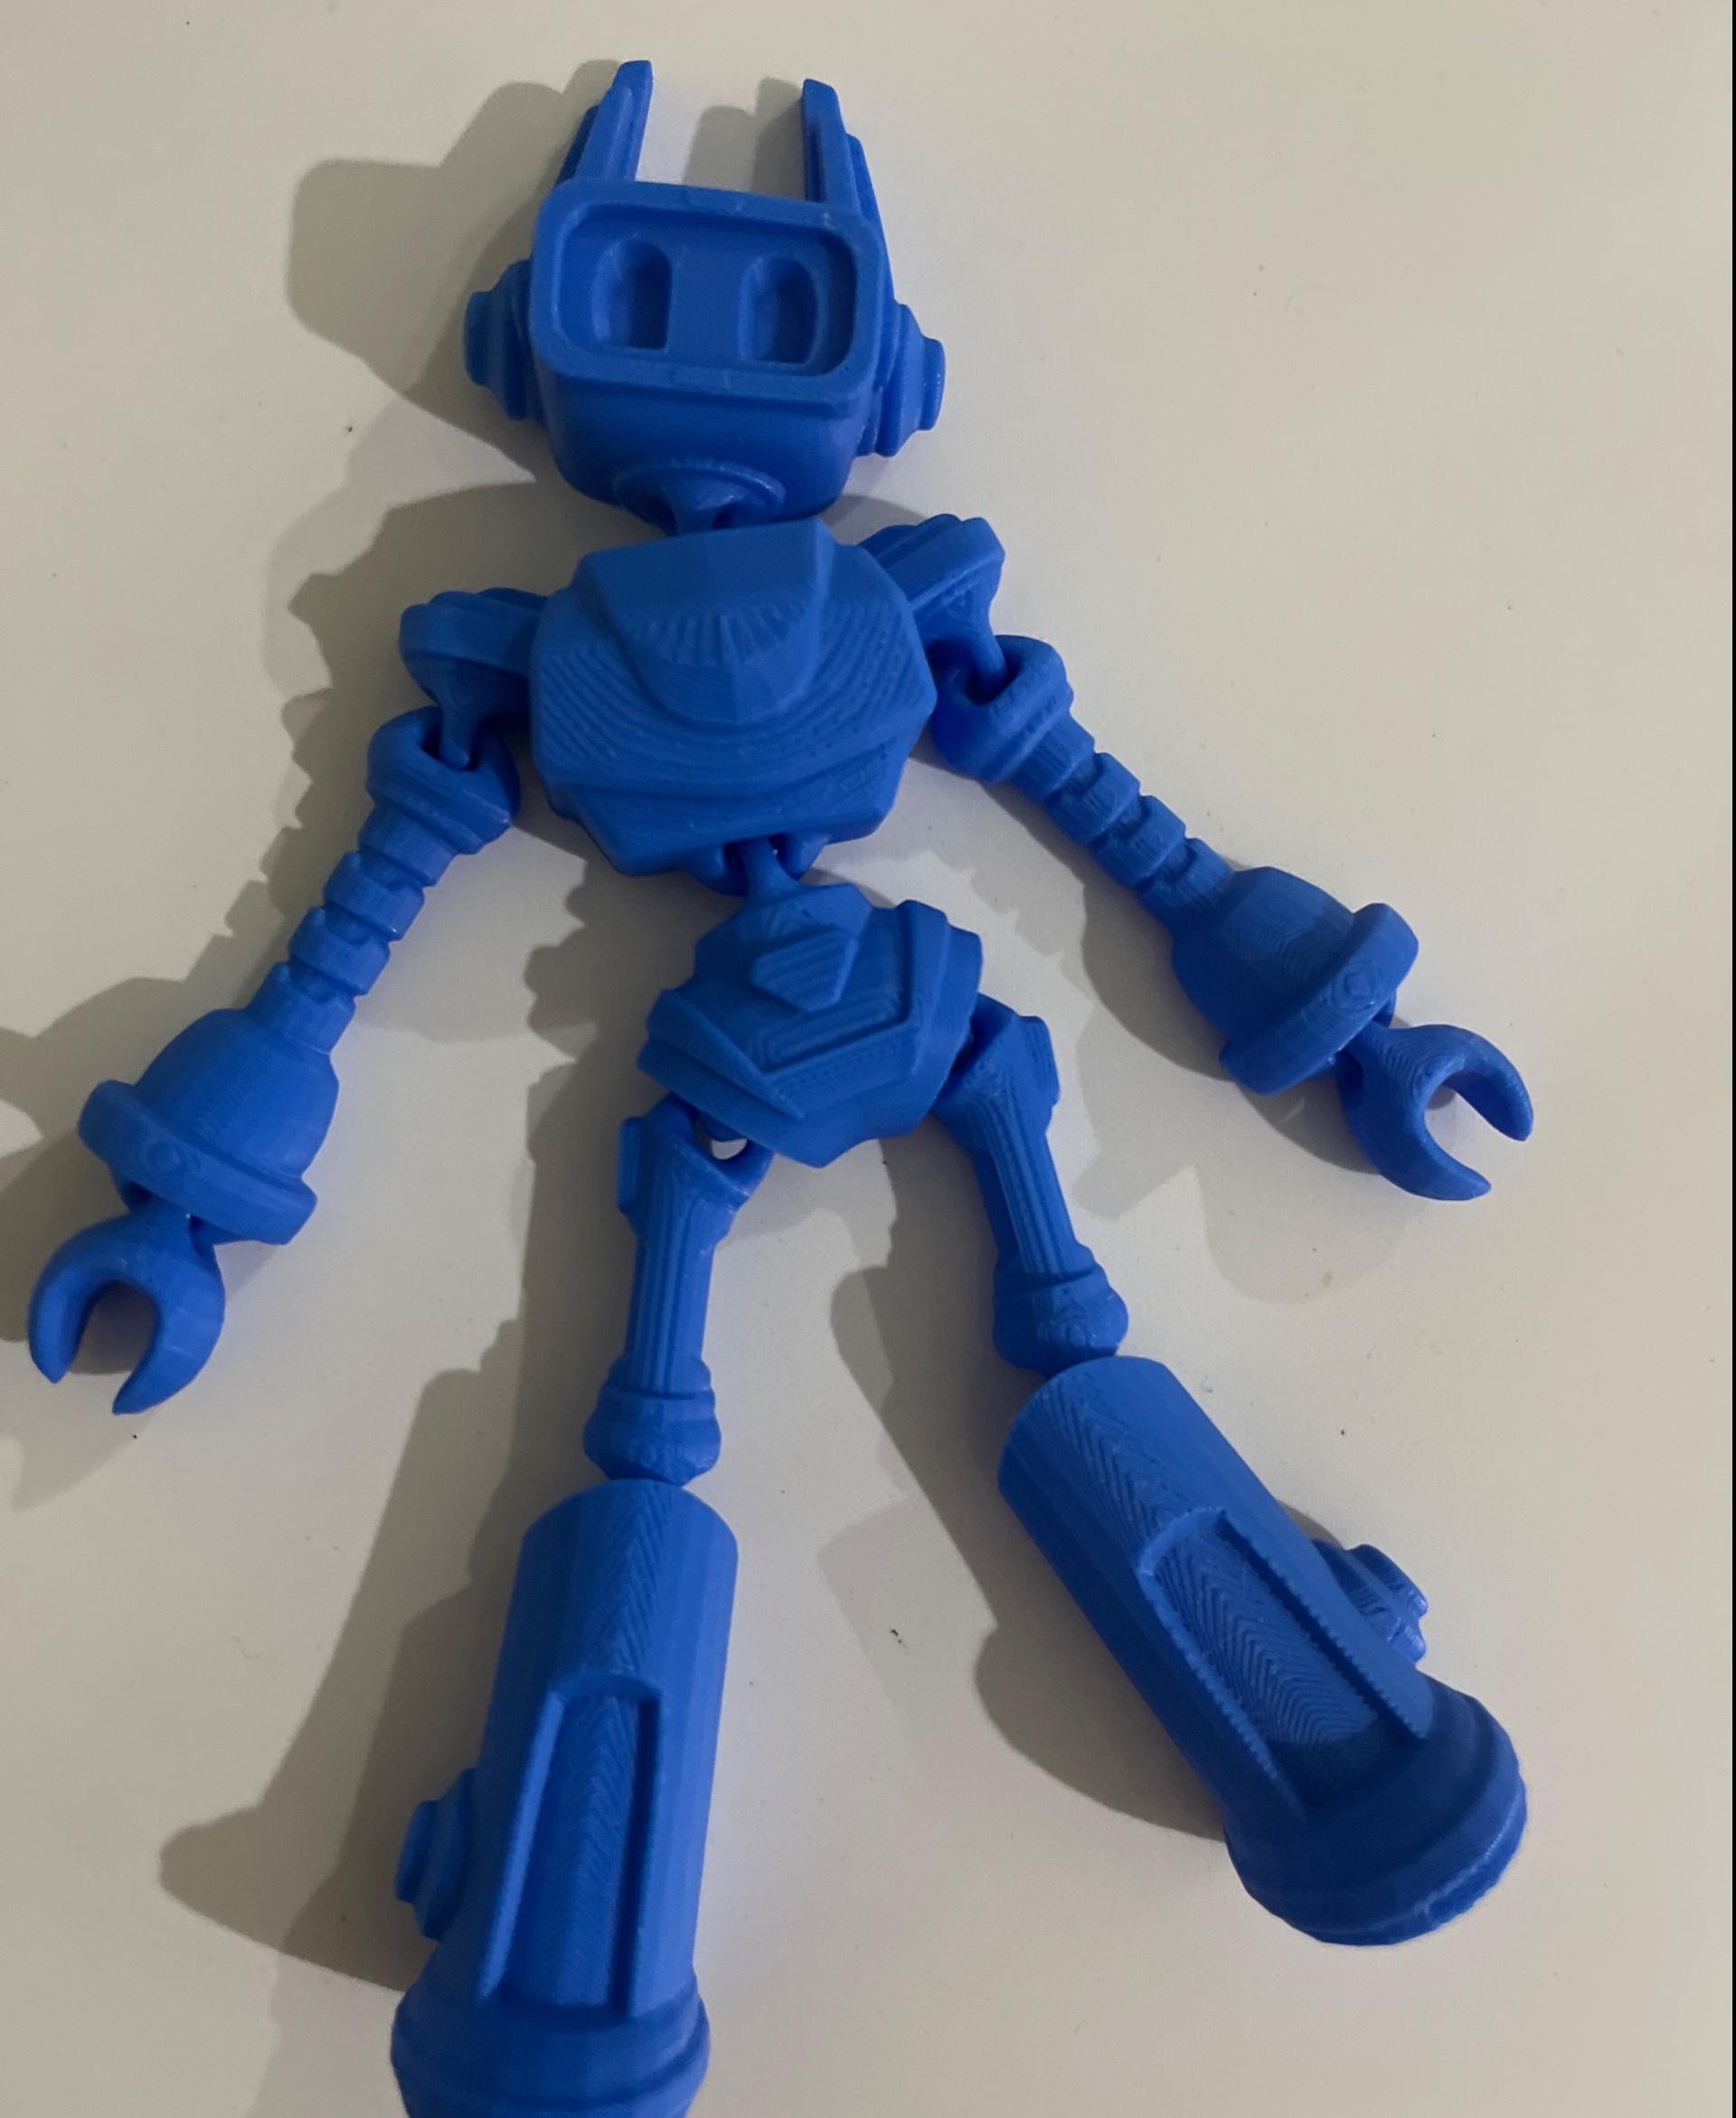 ZILLOLAAB - ZIPPY THE BOT 🤖 - Super cool print! I am new to 3d printing and it was super easy to setup, no supports, no fixing anything, overall really good print and super glad with the results, no issues at all and super flexible!!

I printed it on the Bambu labs a1 mini, with 35% infill ( MIKA3D Blue PLA ) - 3d model